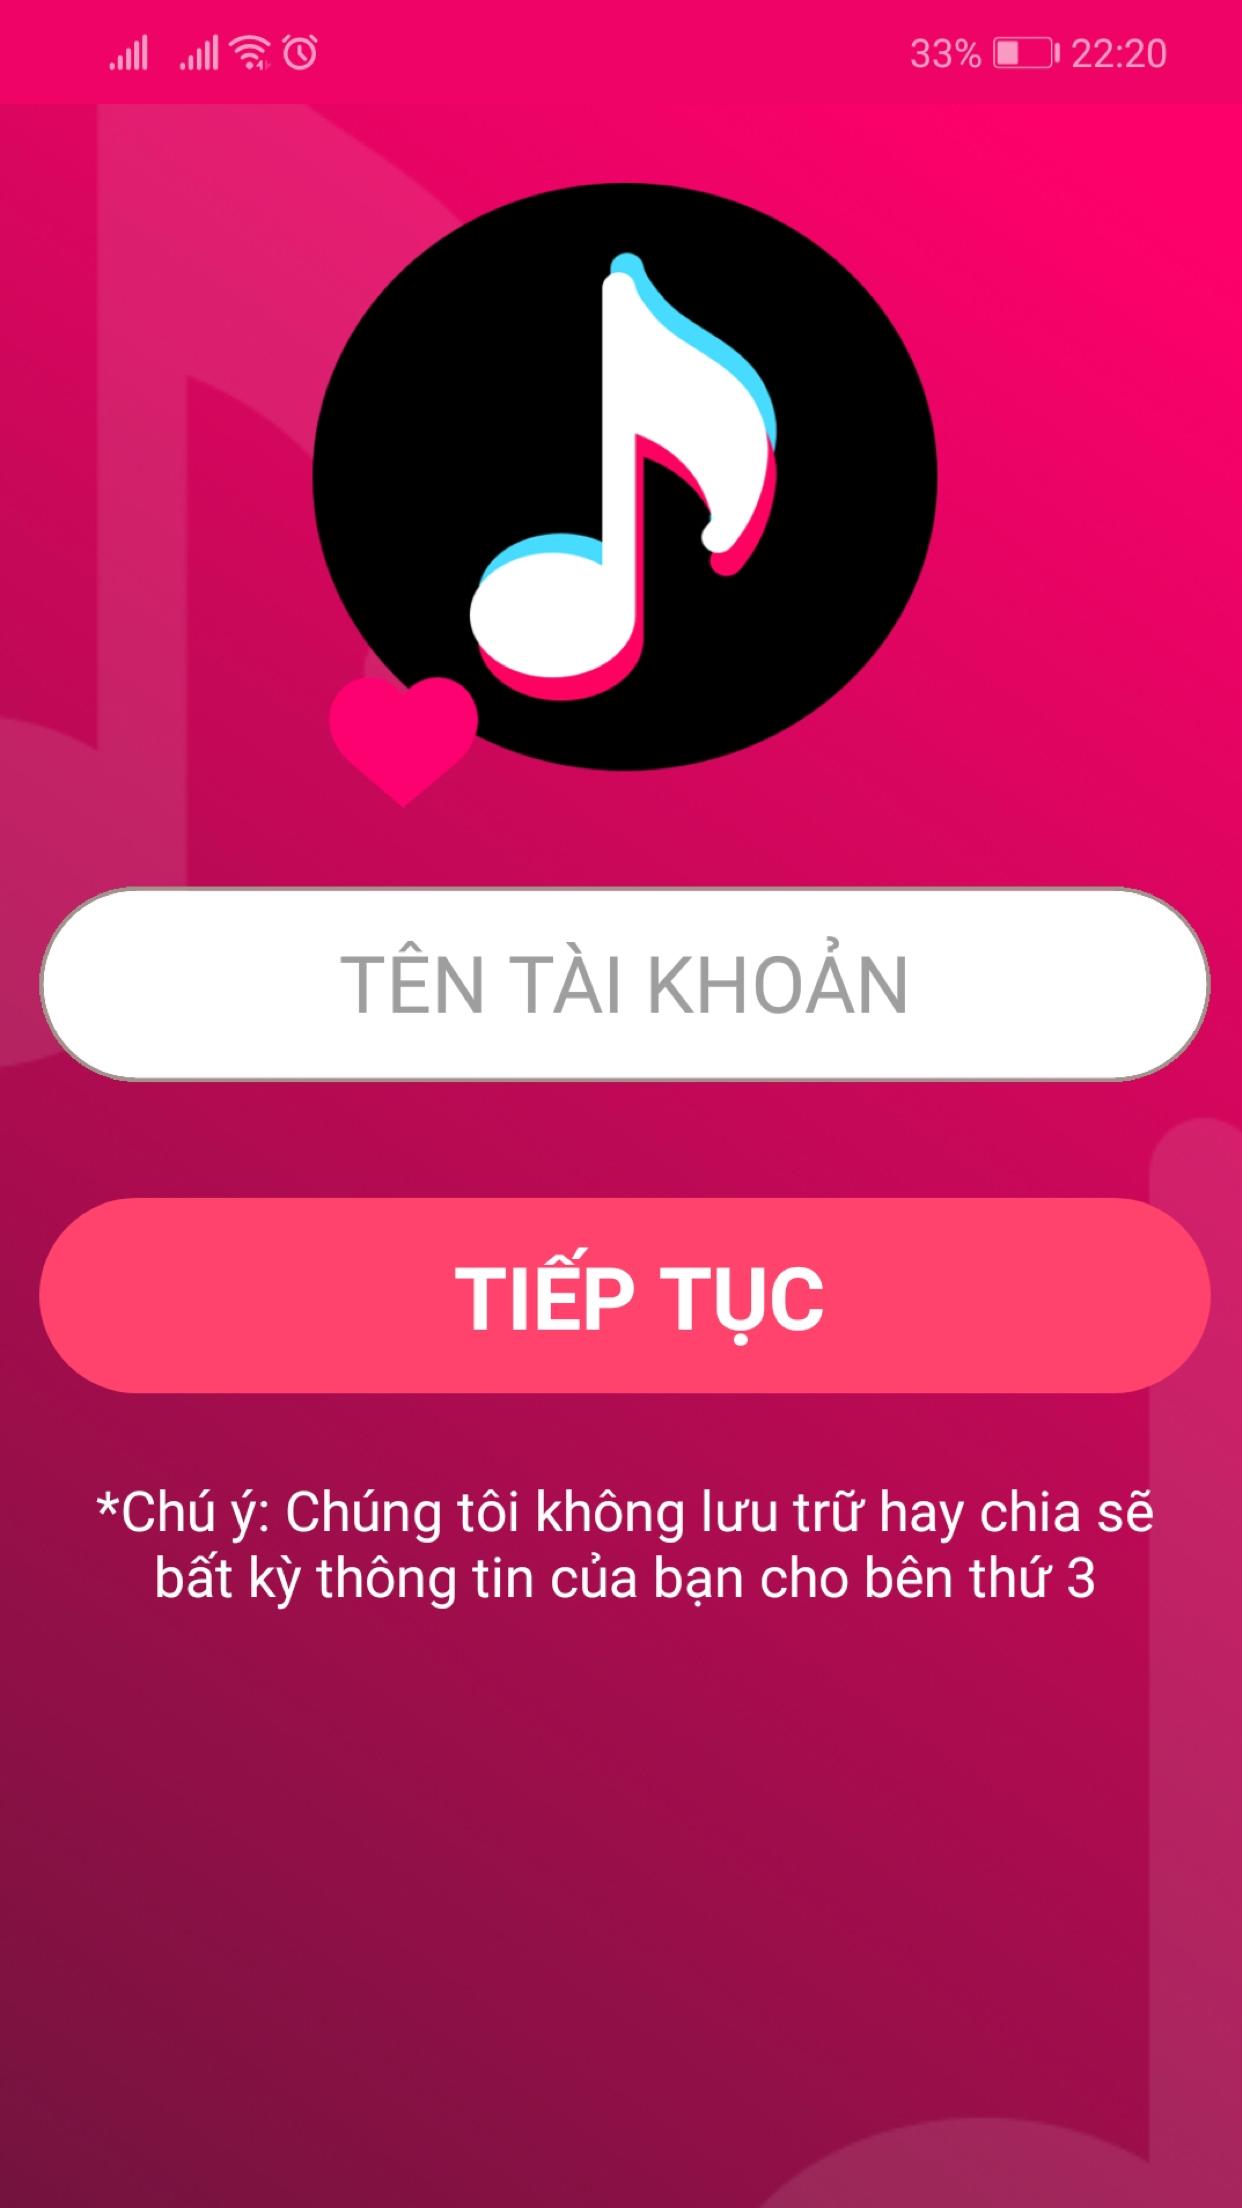 Nybegynder kanal Beregn 1000+ Fans & Followers Free For Tik Tok APK pour Android Télécharger